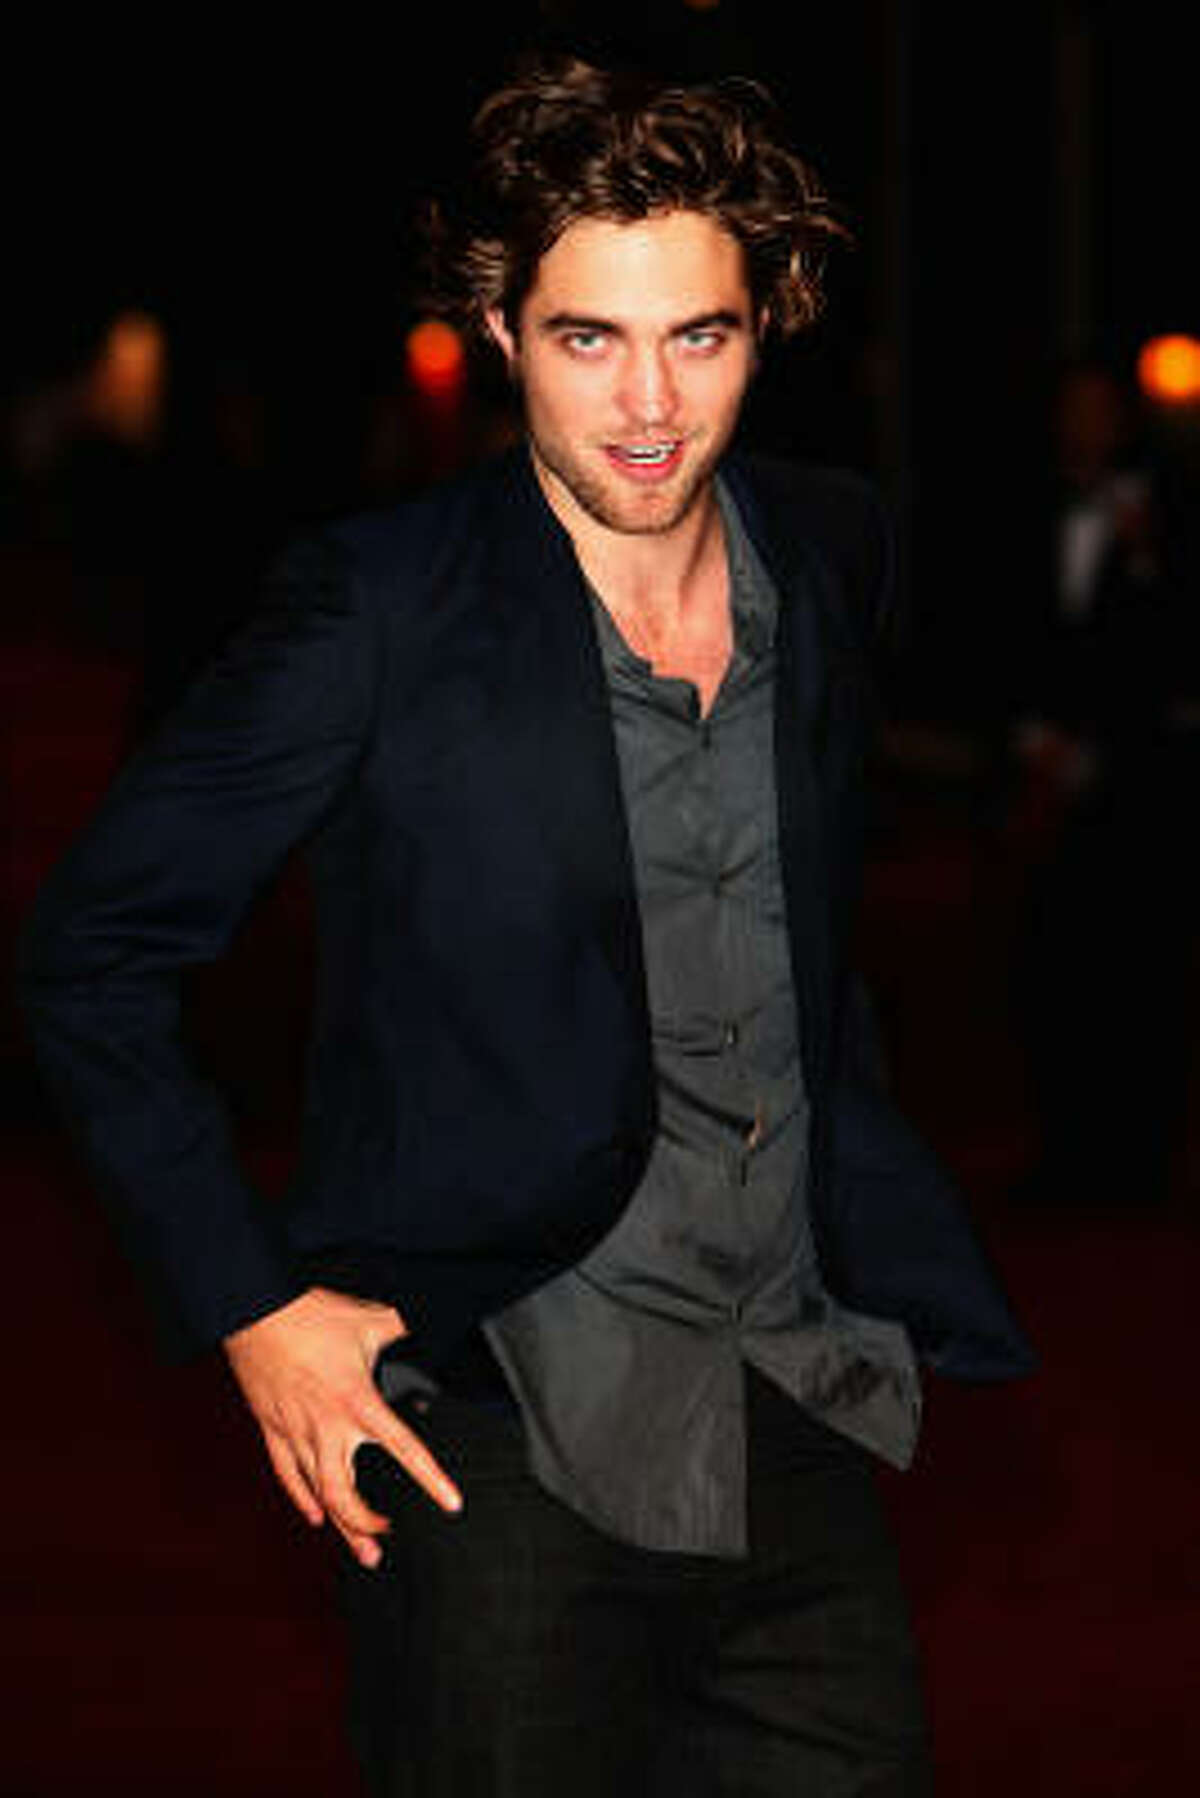 Robert Pattinson's mussed up hair and laid-back style make the tween girls swoon.